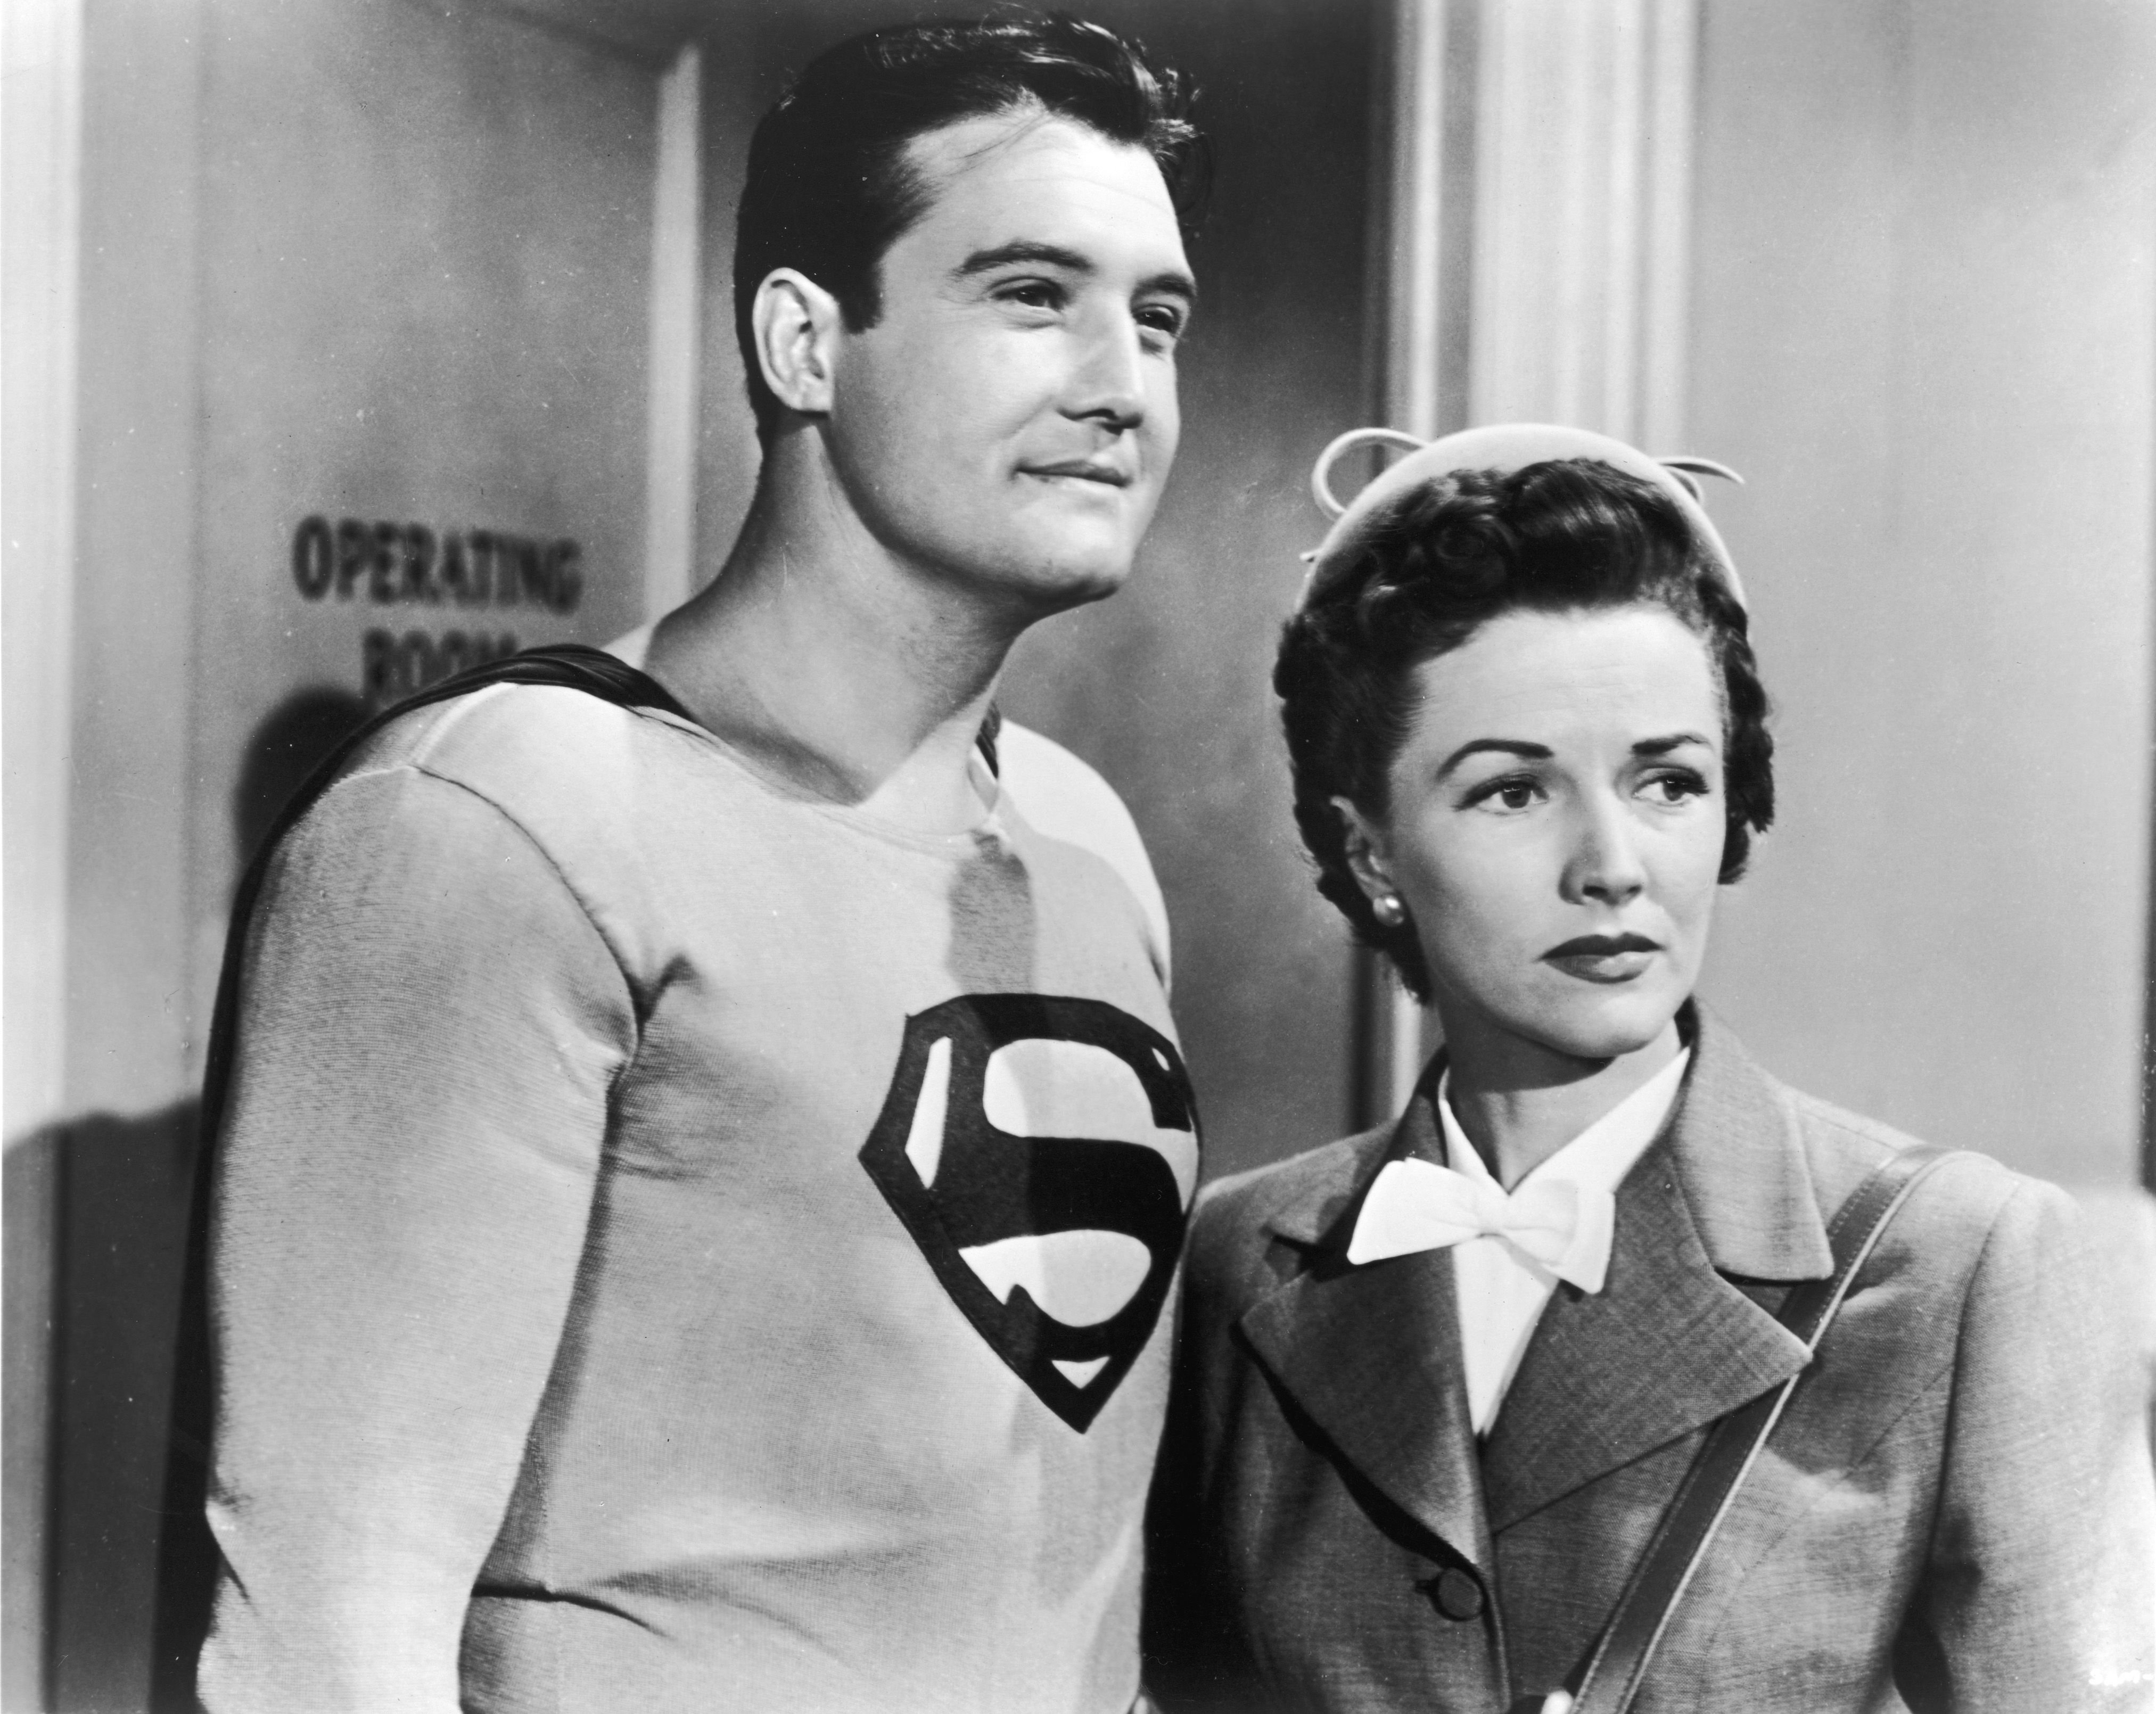 George Reeves, as Superman, with Phyllis Coates, as Lois Lane, in a still from "Adventures of Superman," circa 1952 | Photo: Hulton Archive/Getty Images